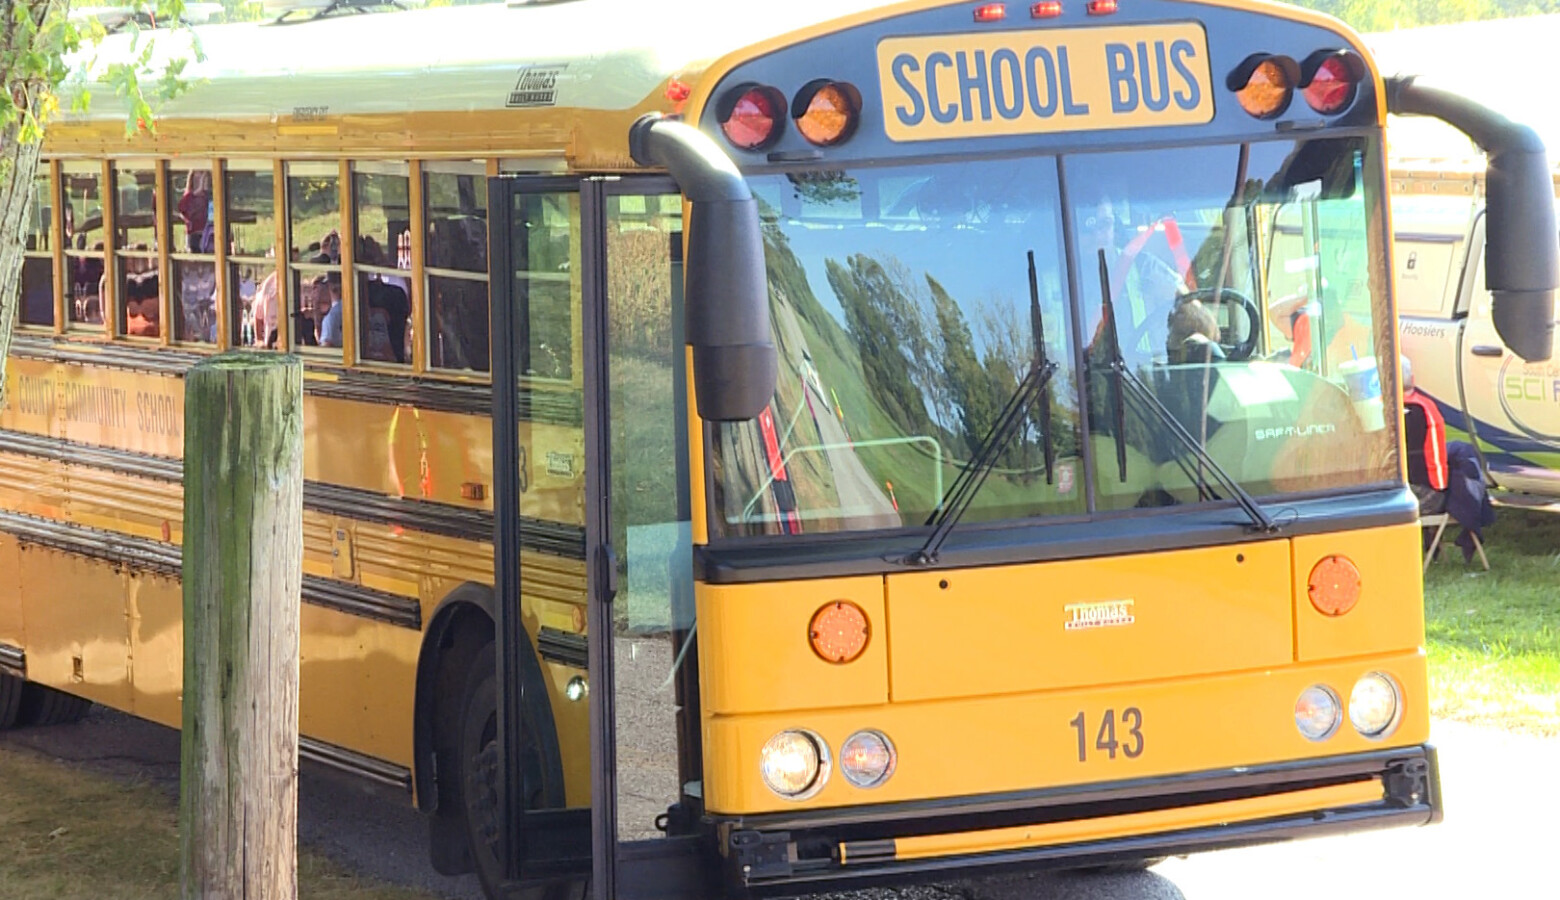 The latest effort for Kokomo school employees to unionize was spurred by bus drivers and aides who are worried about changes to their pay and understaffing. (Jeanie Lindsay/IPB News)